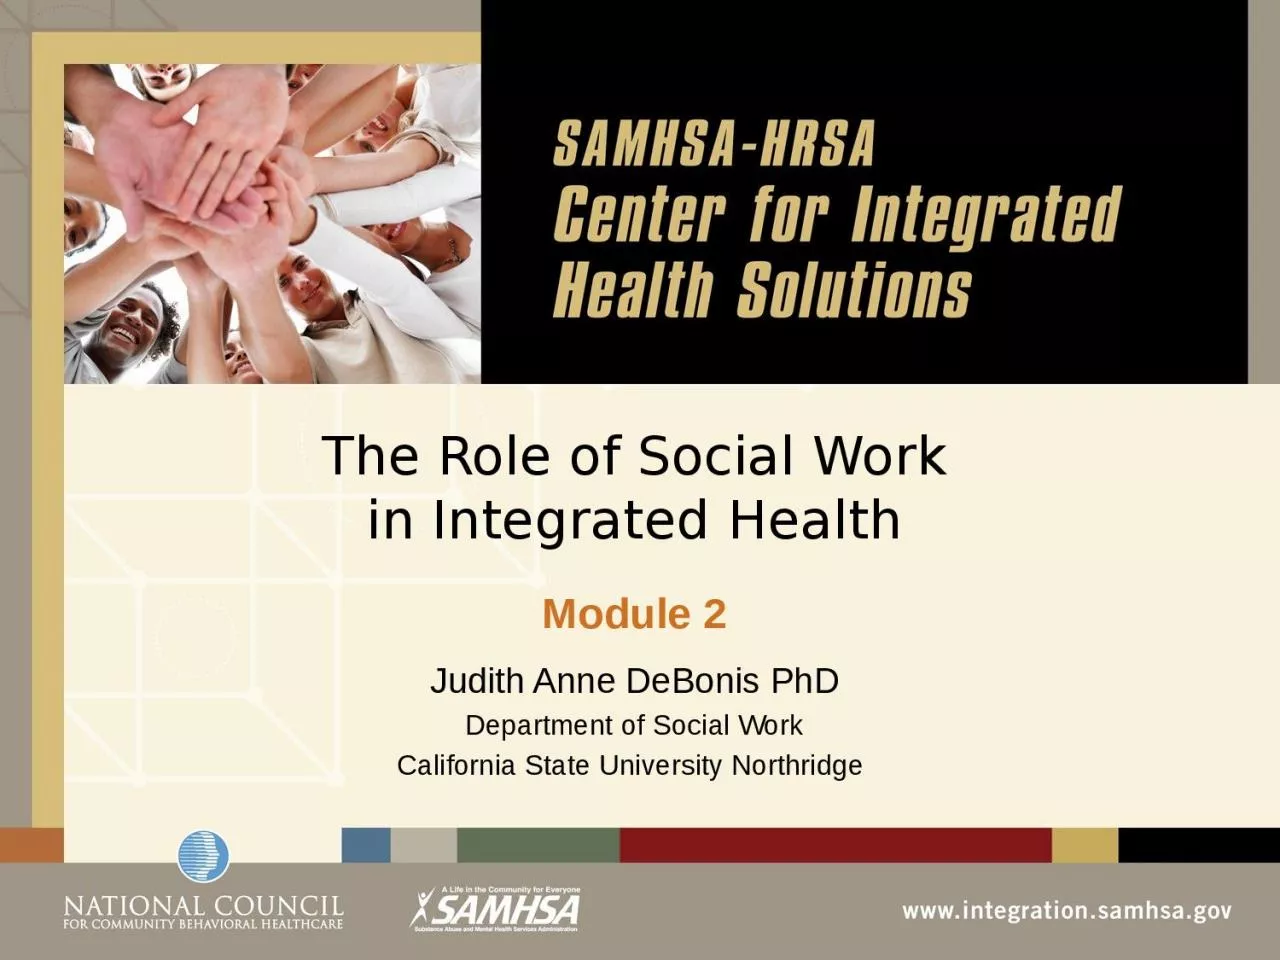 The Role of Social Work in Integrated Health